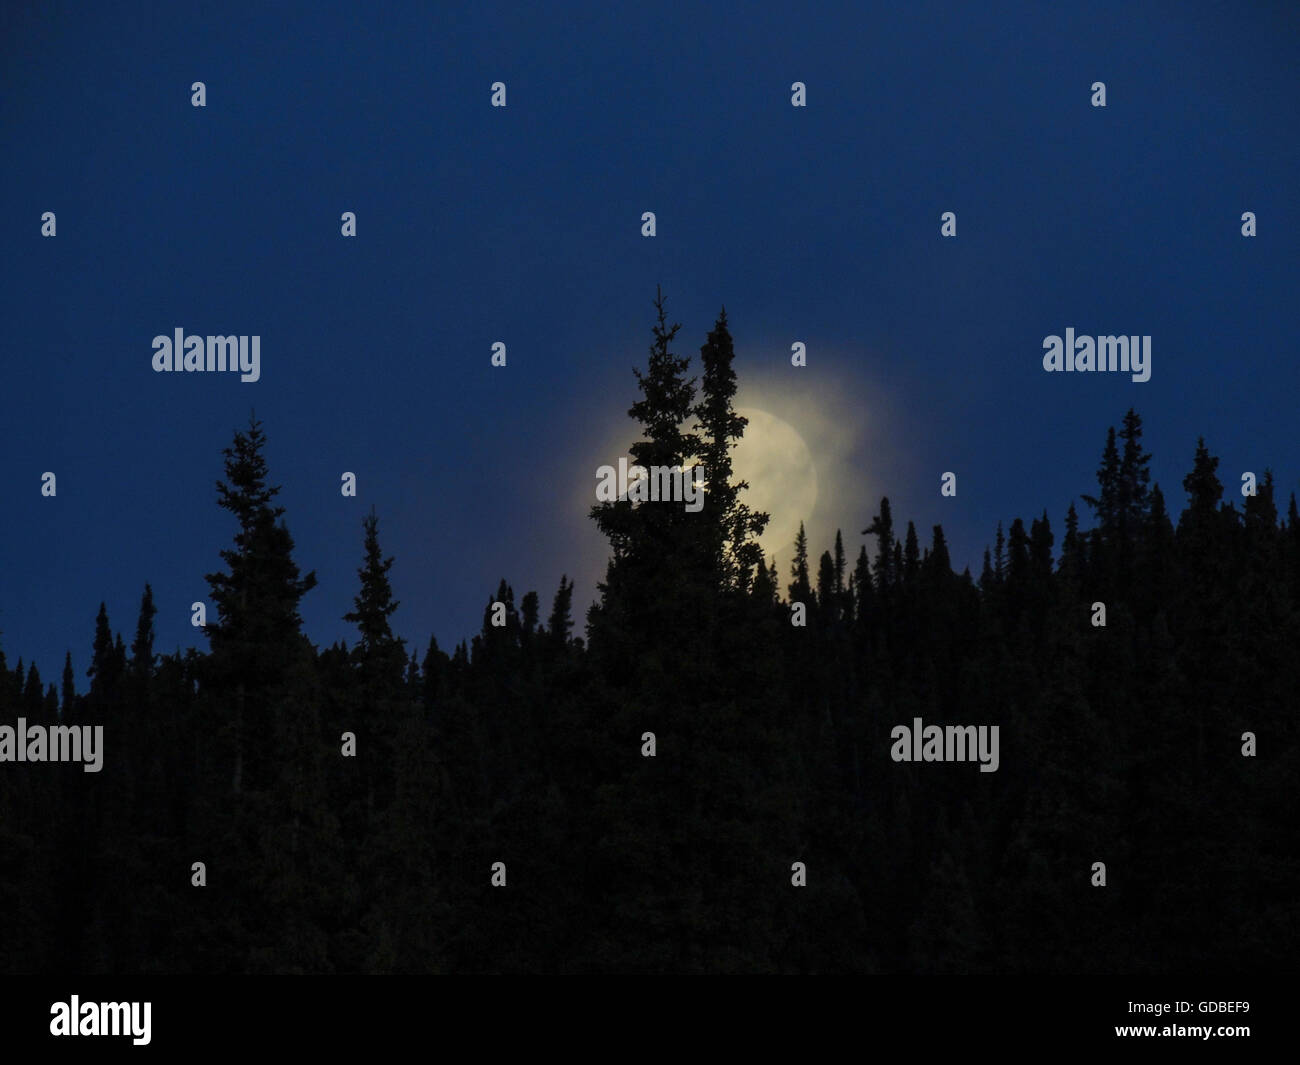 Moonrise along the Alaska Highway between Fort Nelson and Fort St. John, British Columbia, Canada. Stock Photo